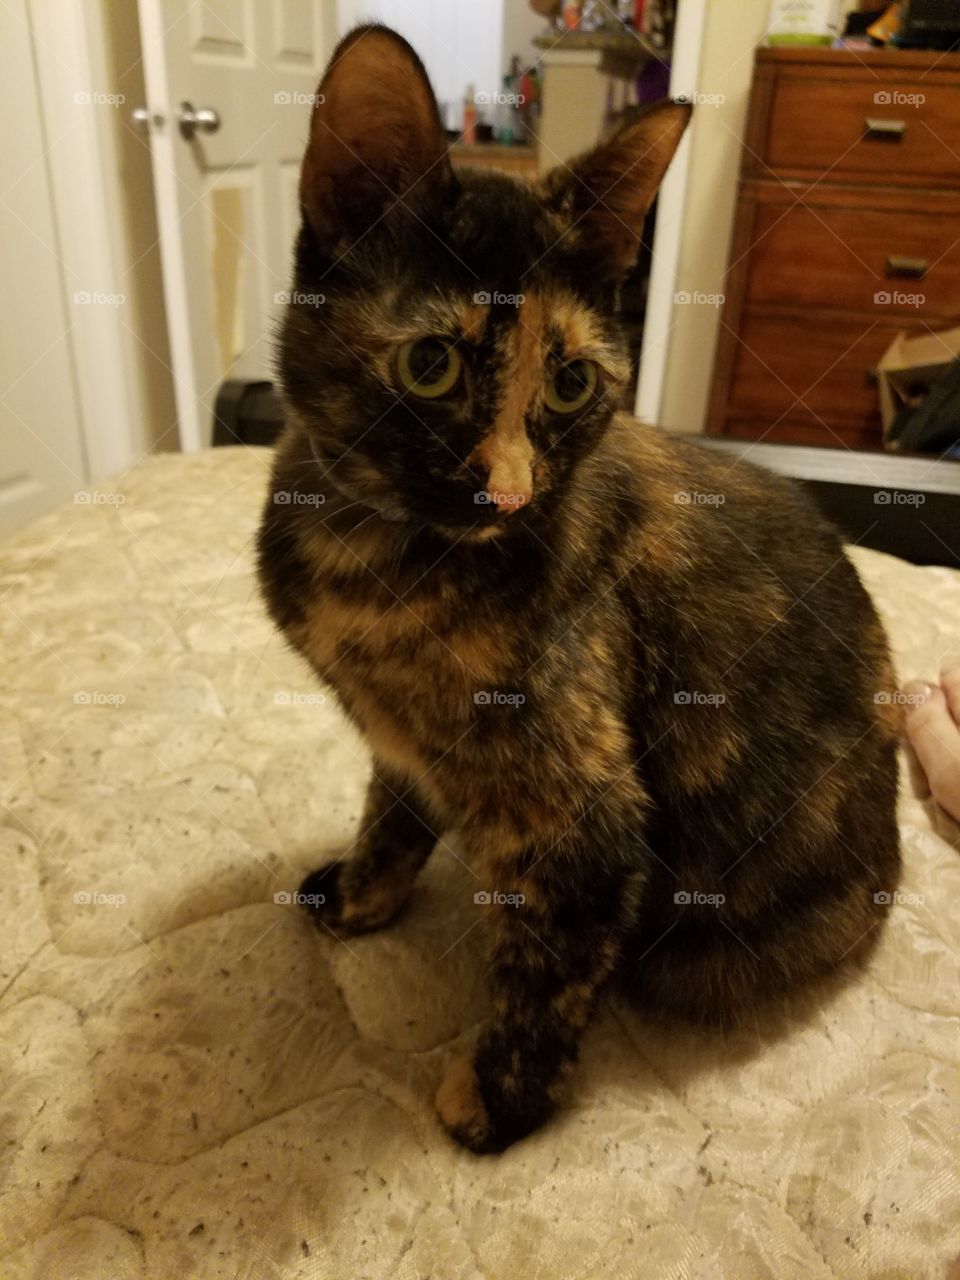 My tortoise shell kitty Circe.  She is adorable, and a huge spaz!